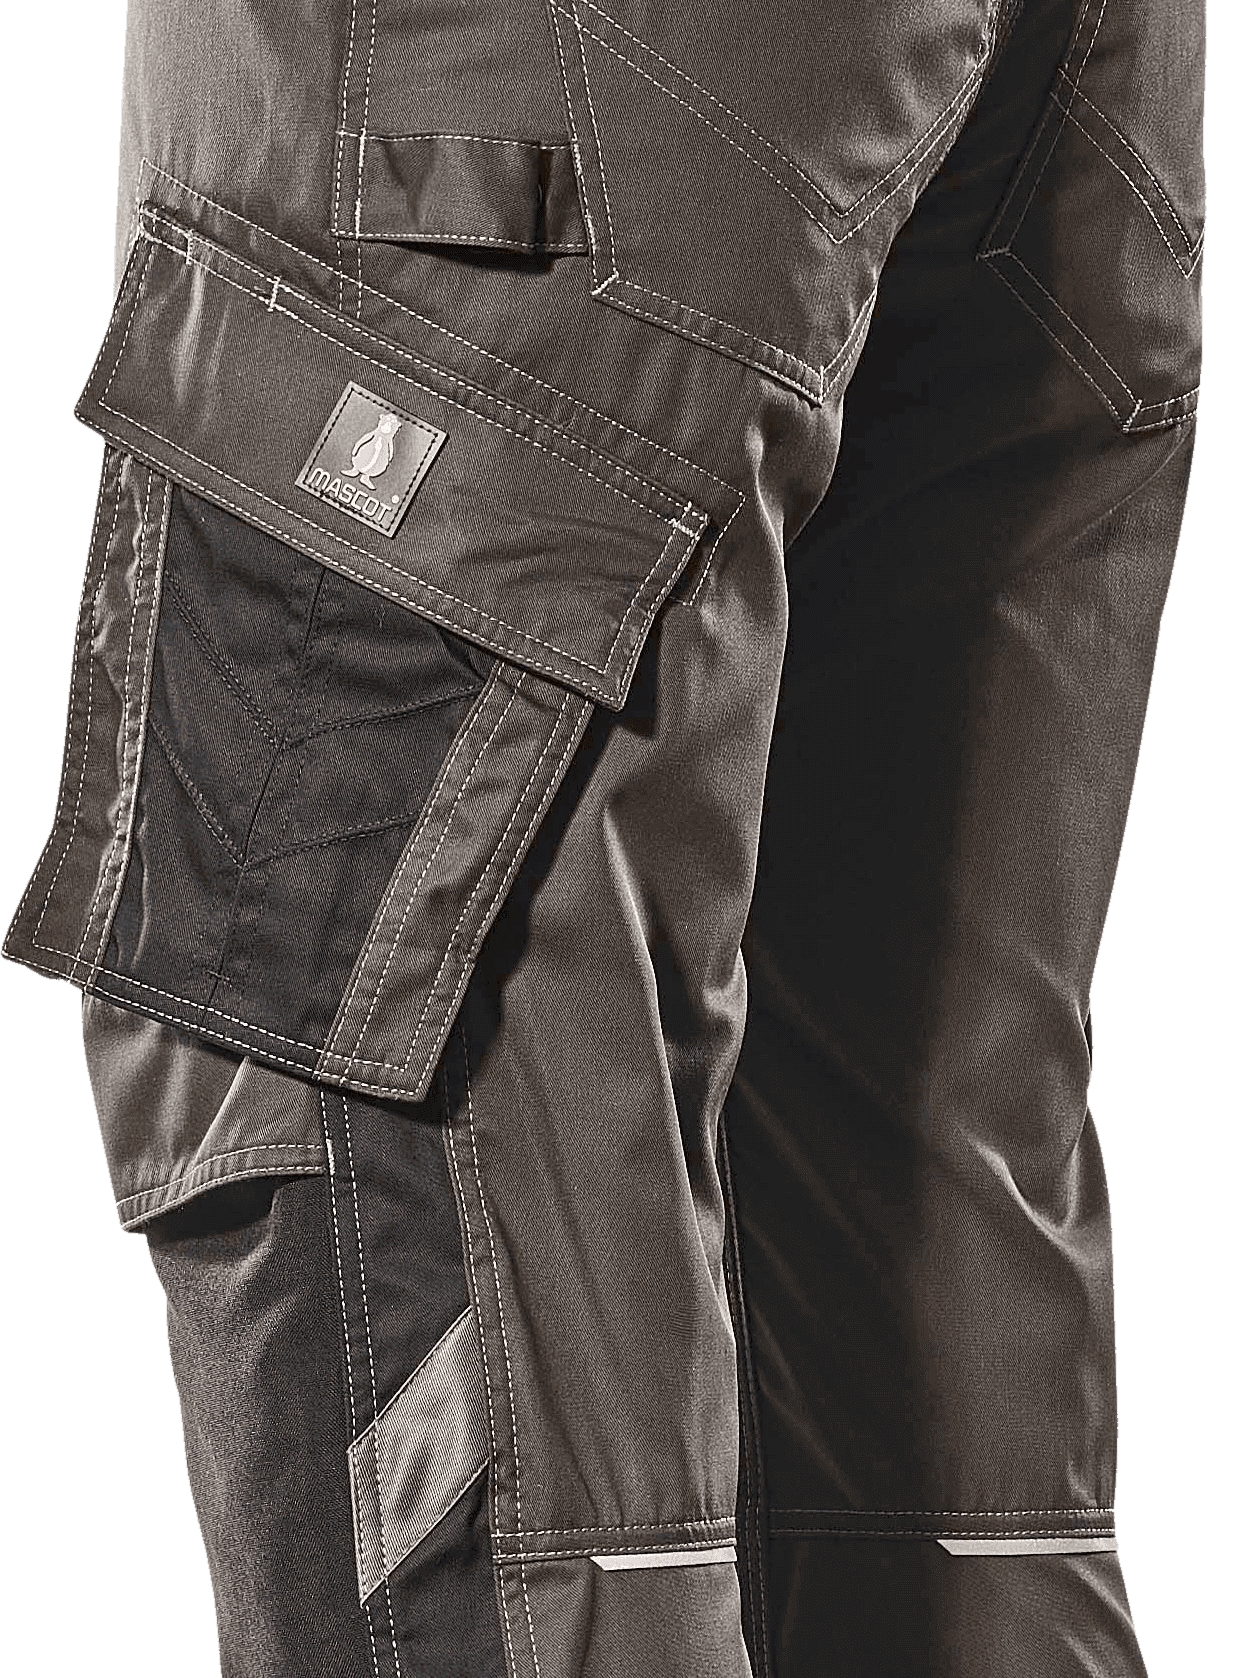 Work Trousers with Kneepad Pockets 13079-230